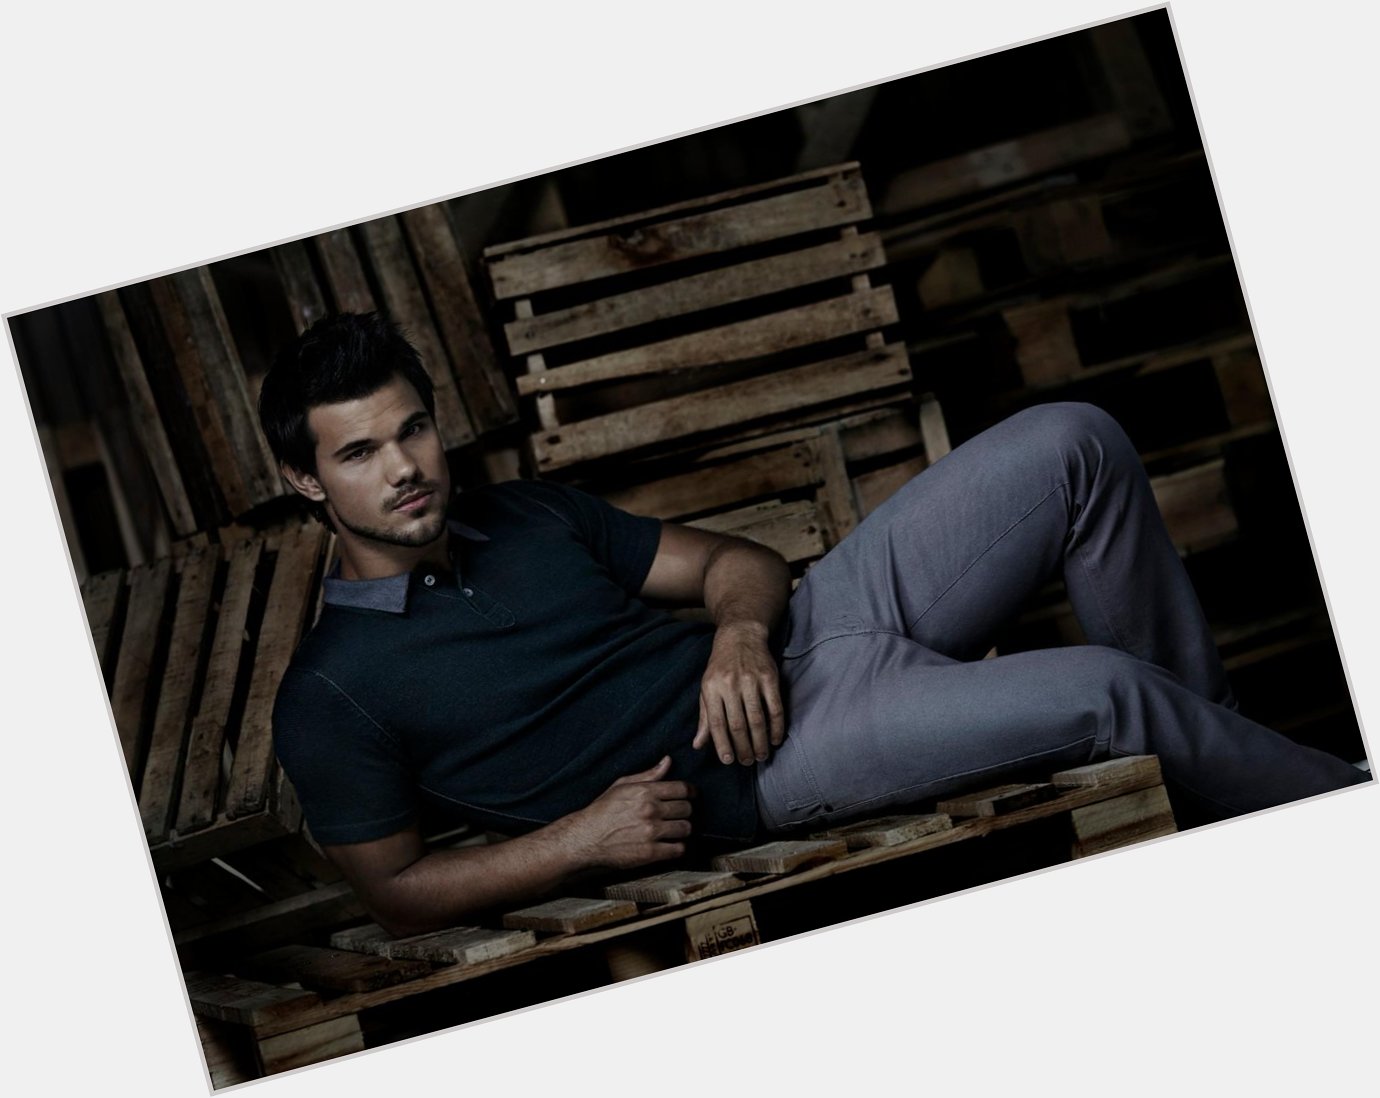 HAPPY 23rd BIRTHDAY Twilight co-star Taylor Lautner. Hope you had a fantastic day!  